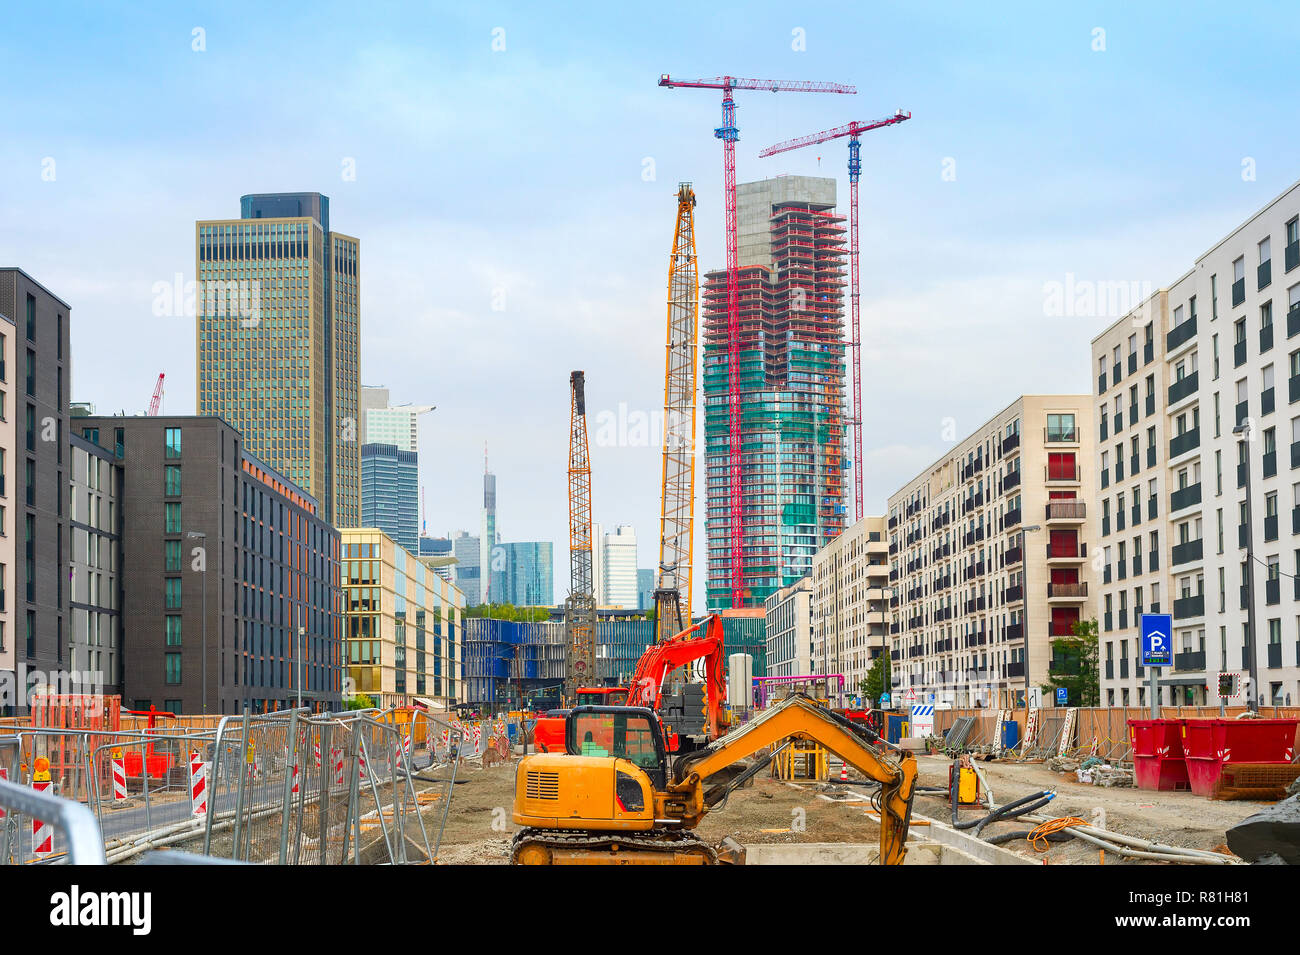 Excavator, cranes and construction equipment at construction site in downtown at street with buildings and skyscaraprers of modern architecture, Frank Stock Photo